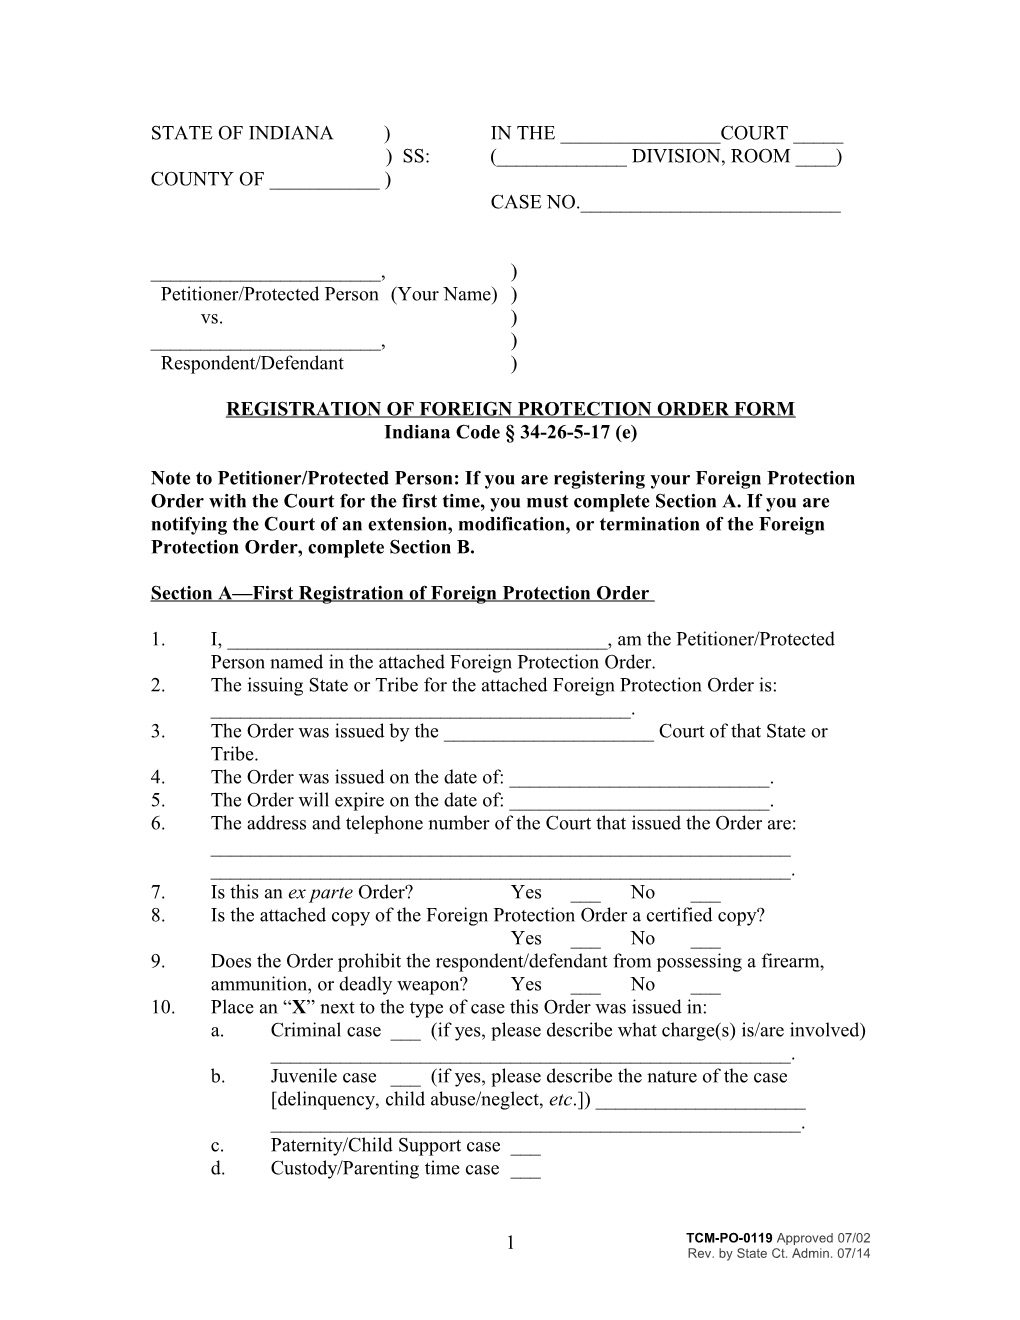 Registration of Foreign Protection Order Form